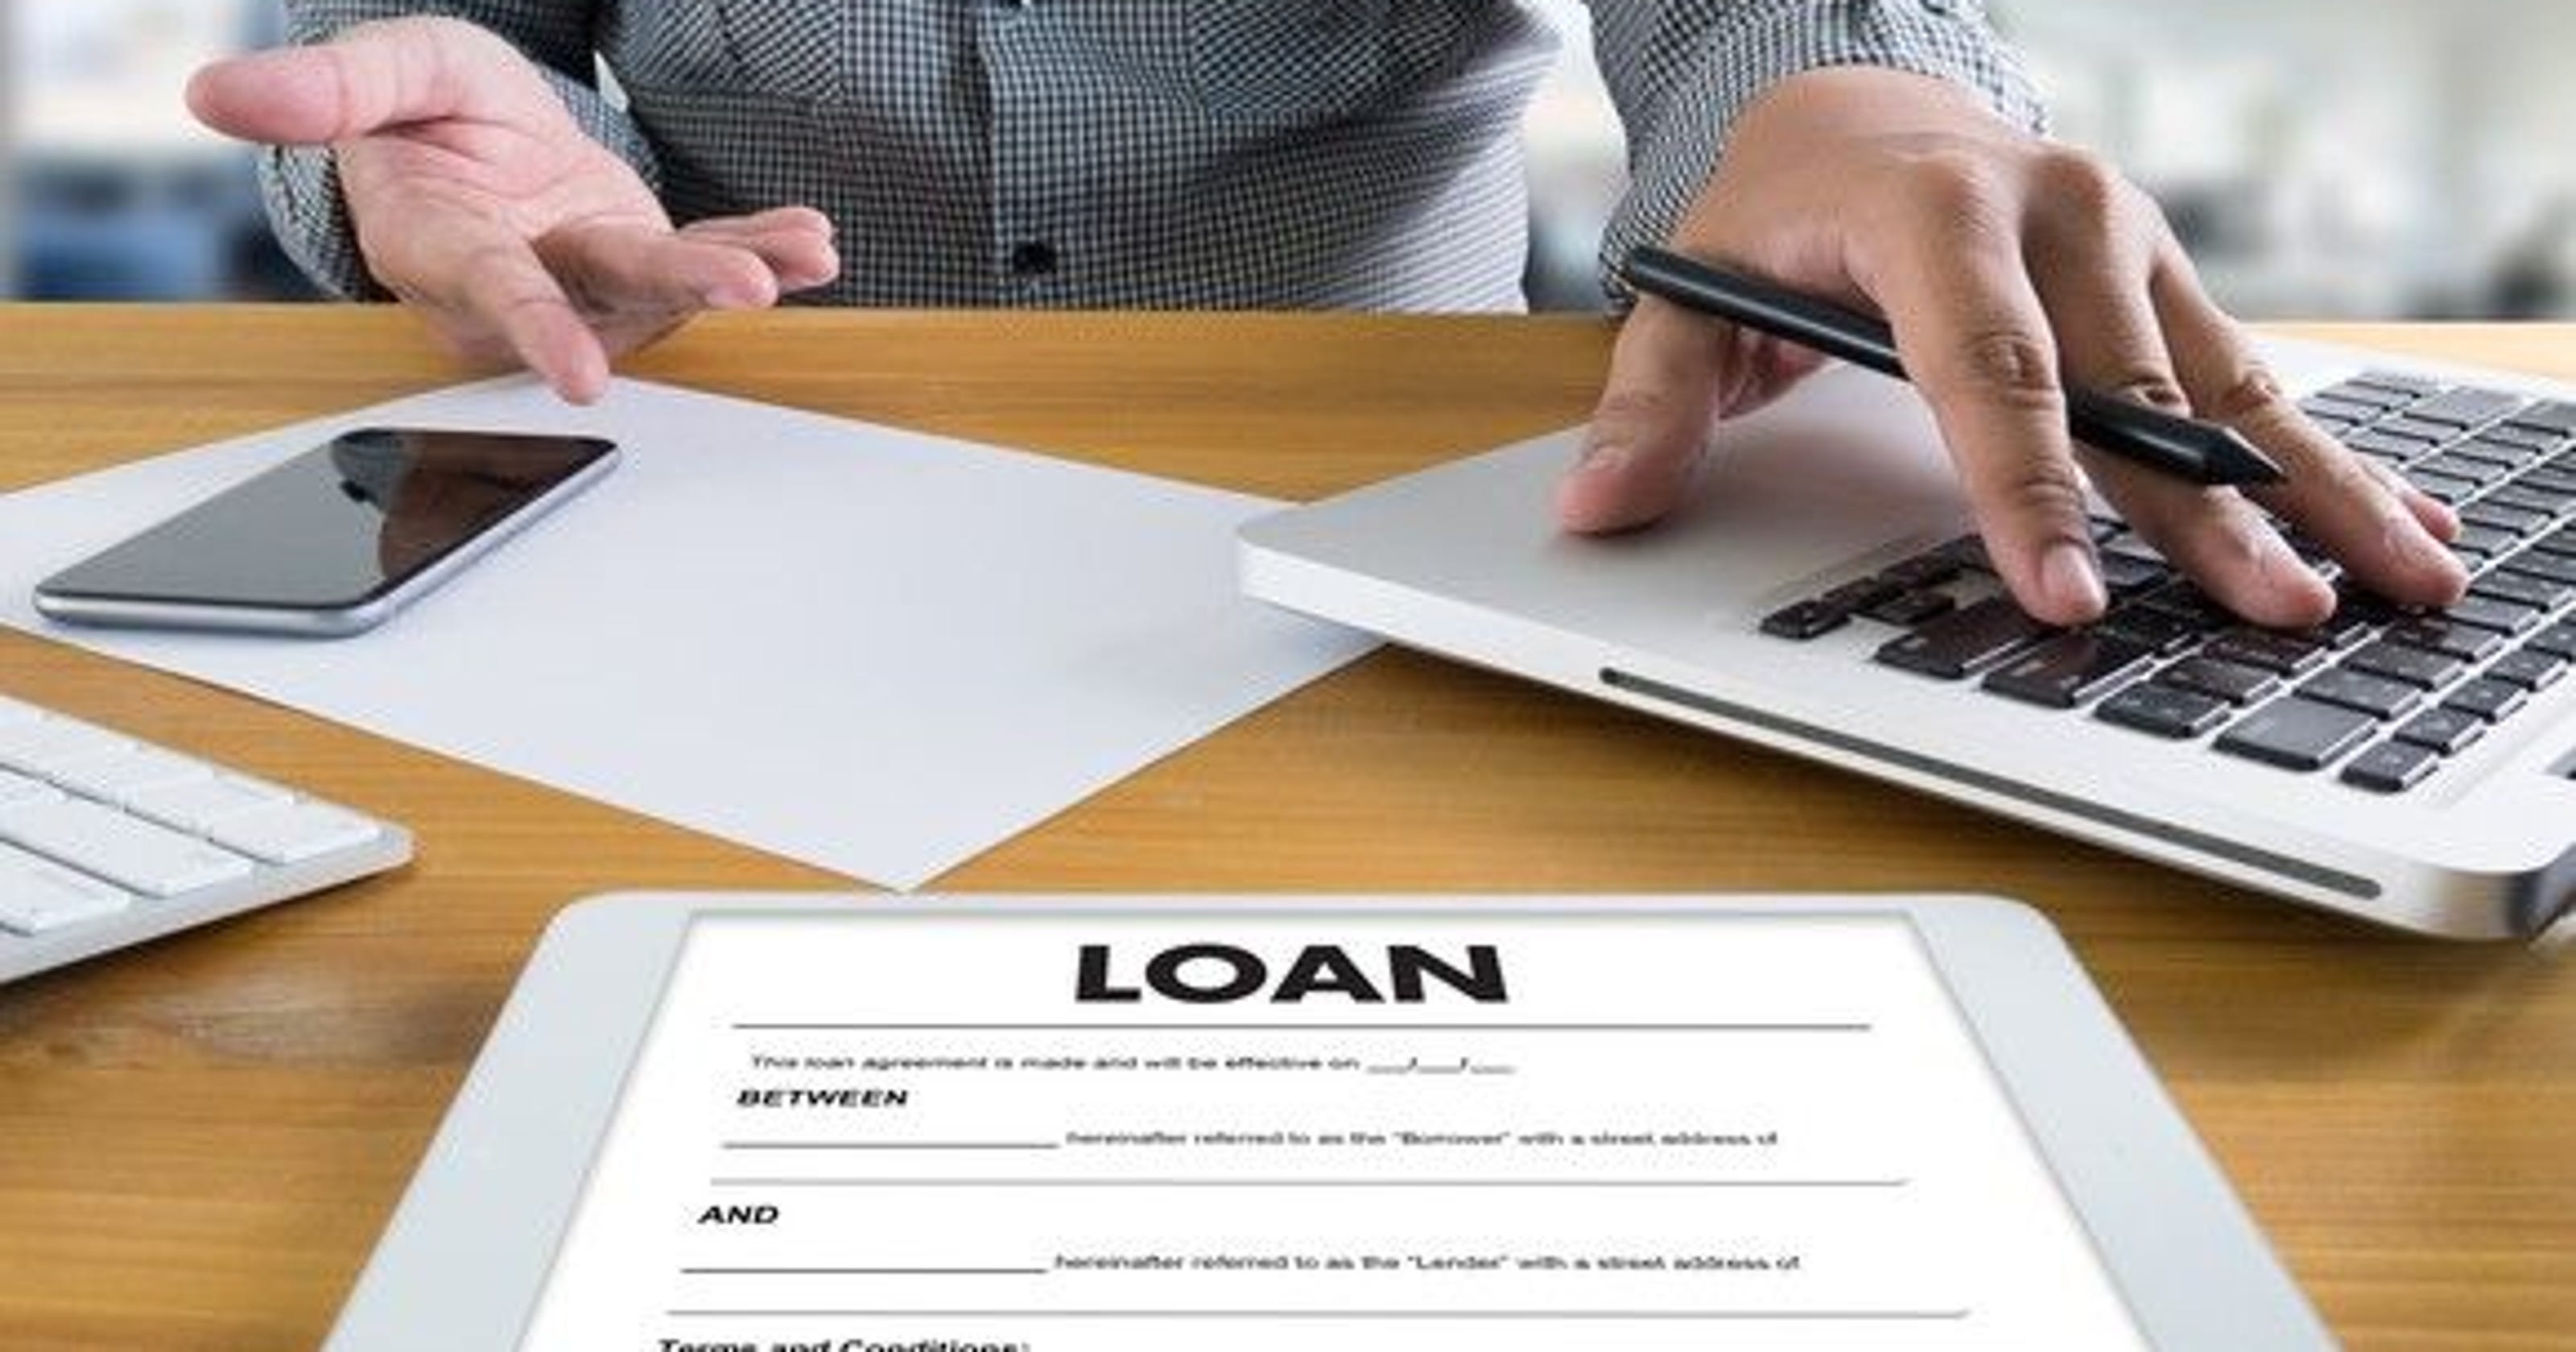 Debt Consolidation loans 5 Tips To Get Approved For One